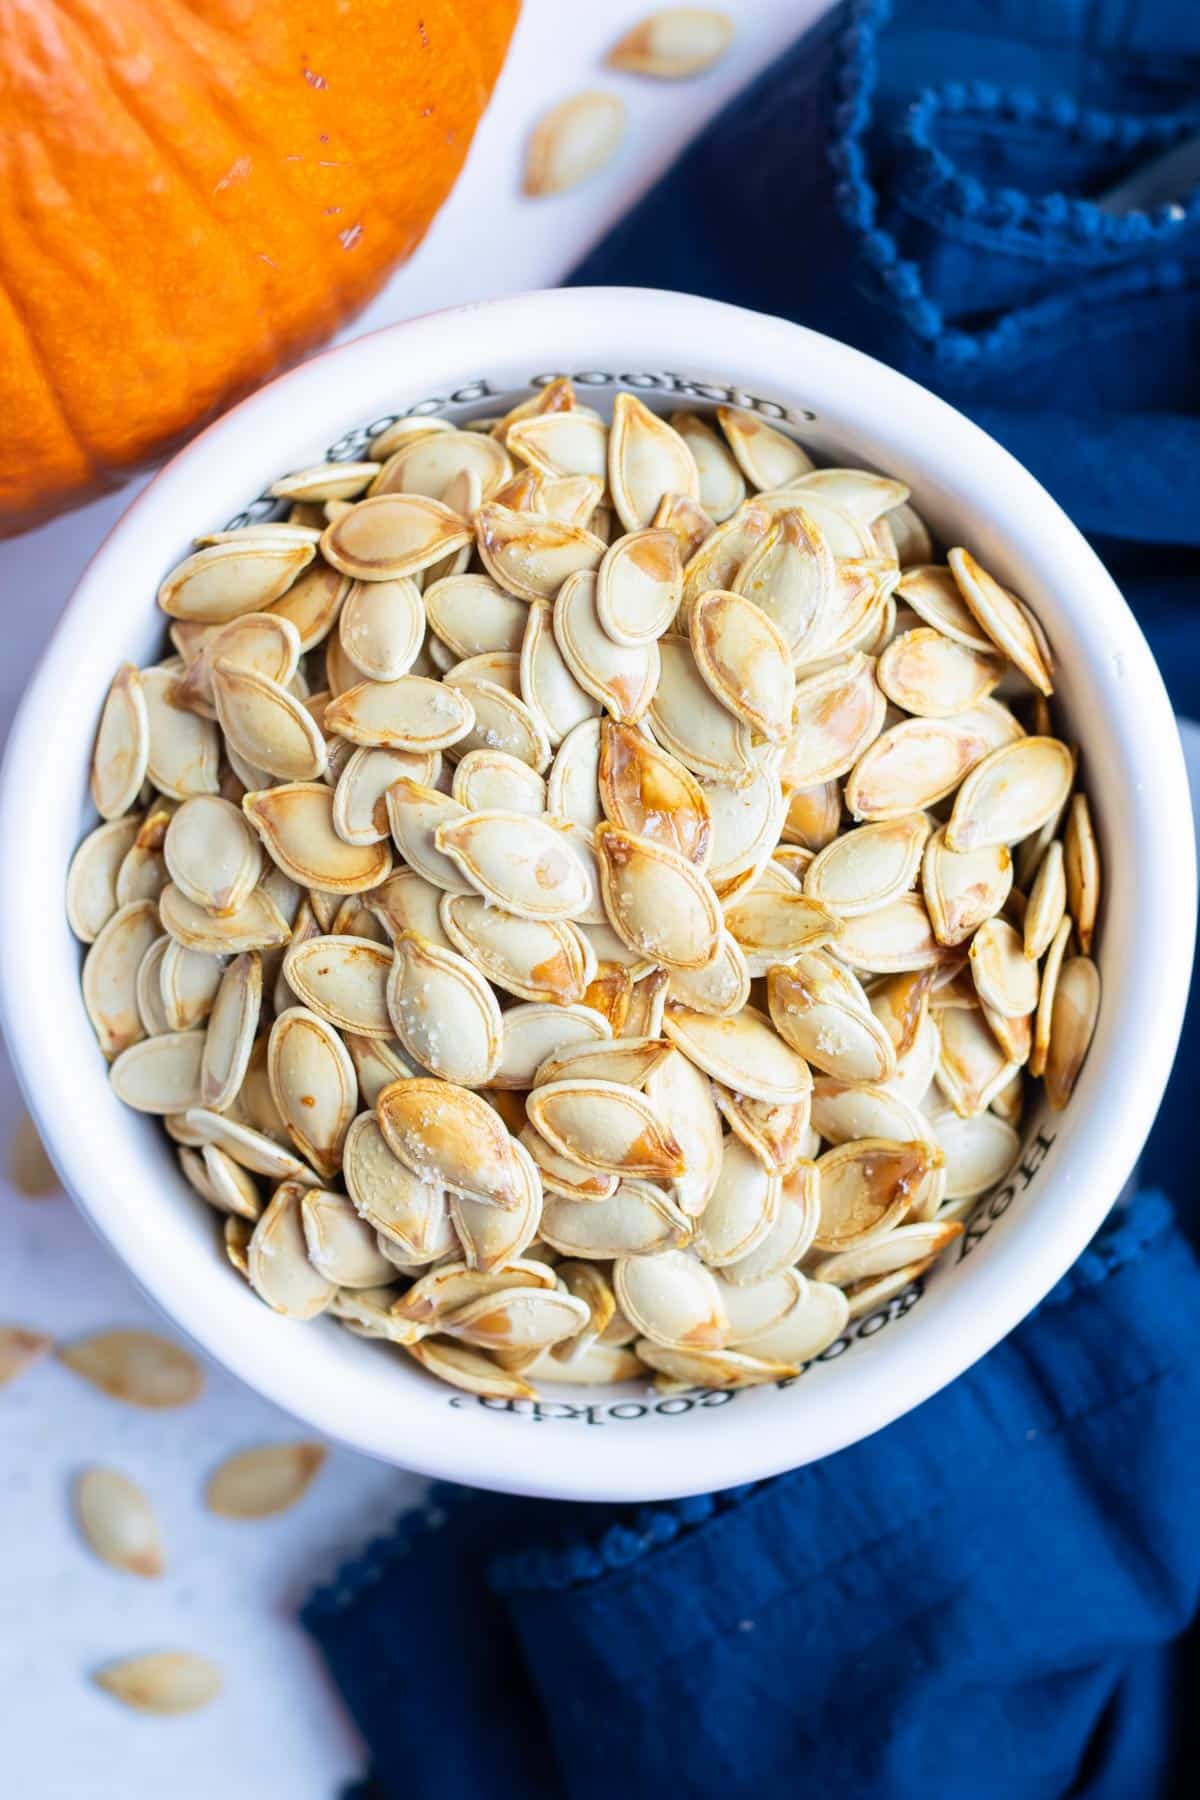 Roasted pumpkin seeds are placed in a bowl before being used in recipes.